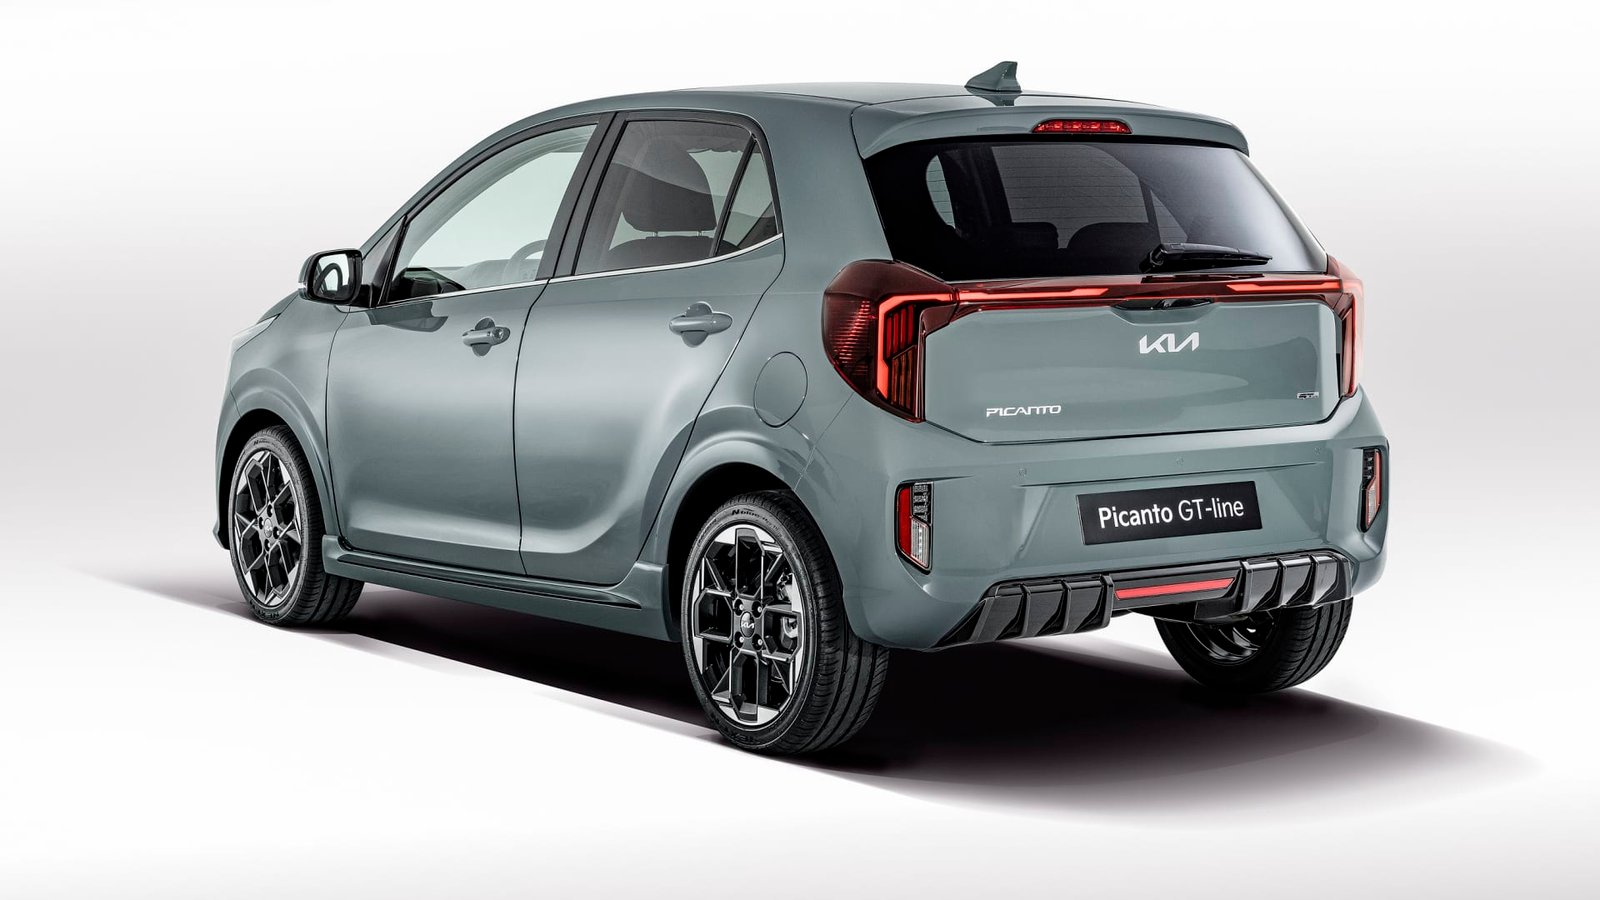 VFACTS: Kia Picanto breaks sales record, demand at all-time high